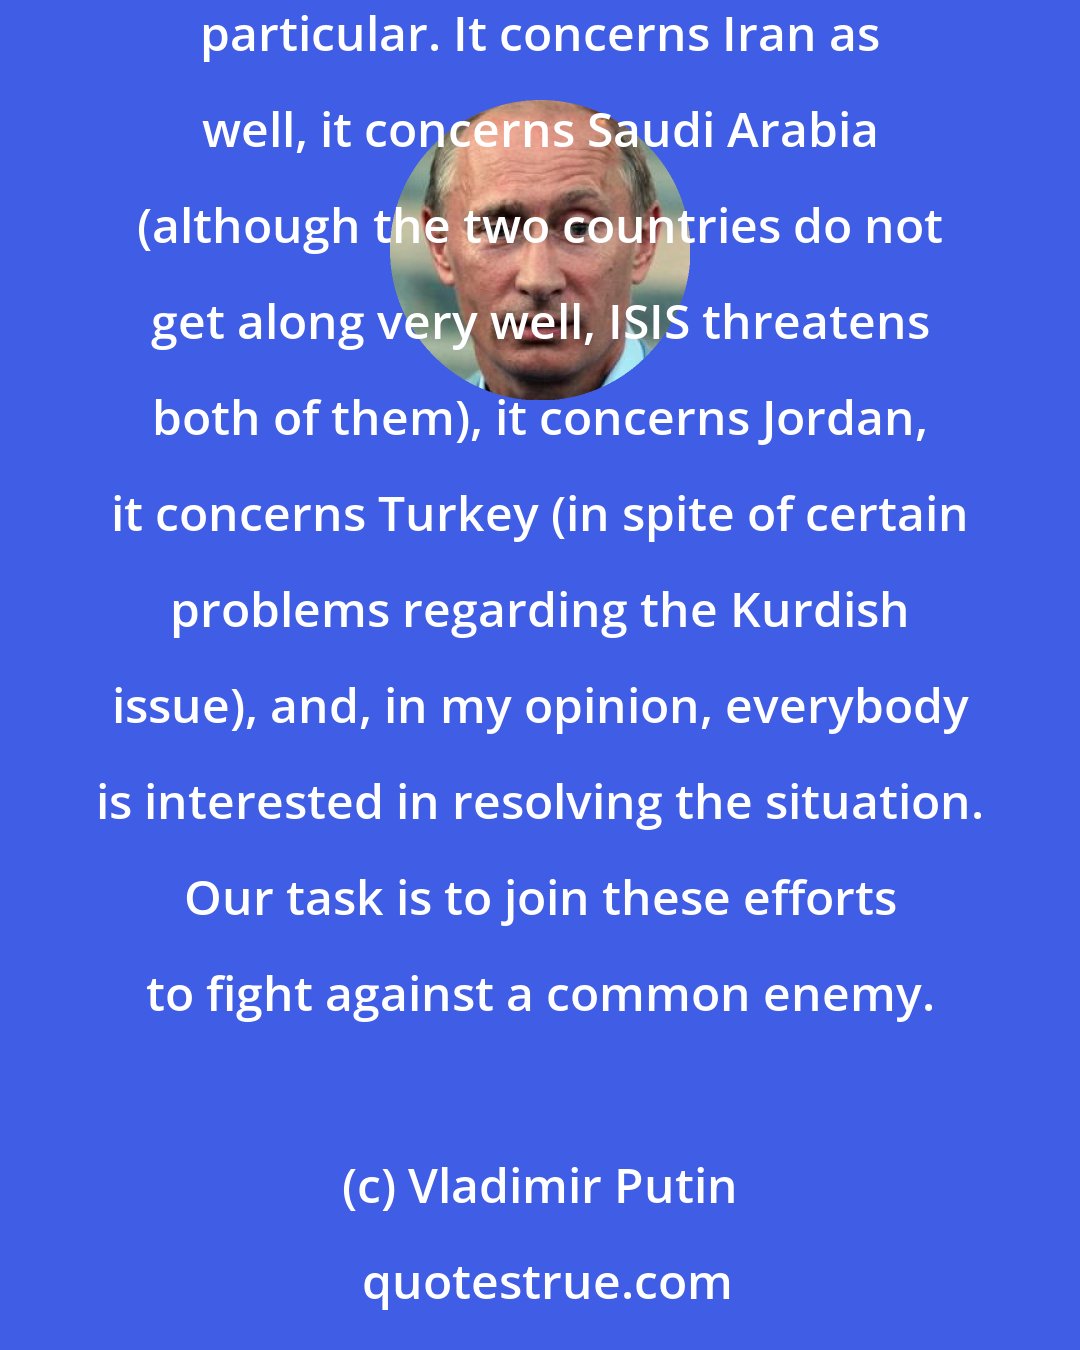 Vladimir Putin: I think that all countries of the region should join their efforts in the fight against a common threat - terrorism in general and ISIS in particular. It concerns Iran as well, it concerns Saudi Arabia (although the two countries do not get along very well, ISIS threatens both of them), it concerns Jordan, it concerns Turkey (in spite of certain problems regarding the Kurdish issue), and, in my opinion, everybody is interested in resolving the situation. Our task is to join these efforts to fight against a common enemy.